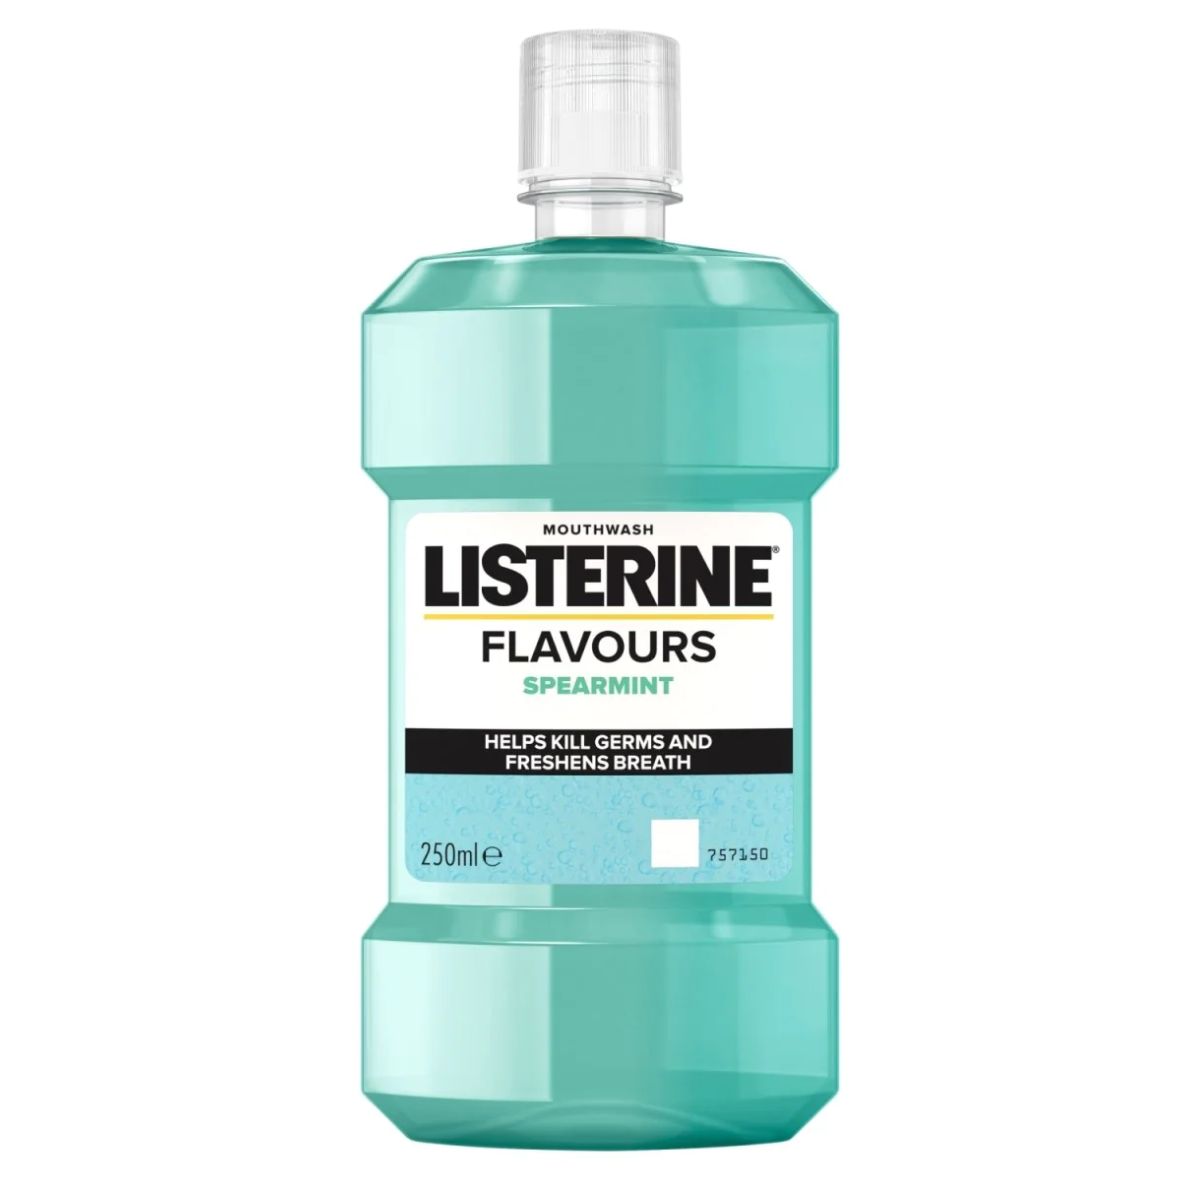 A bottle of Listerine - Spearmint Mouthwash - 250ml on a white background.